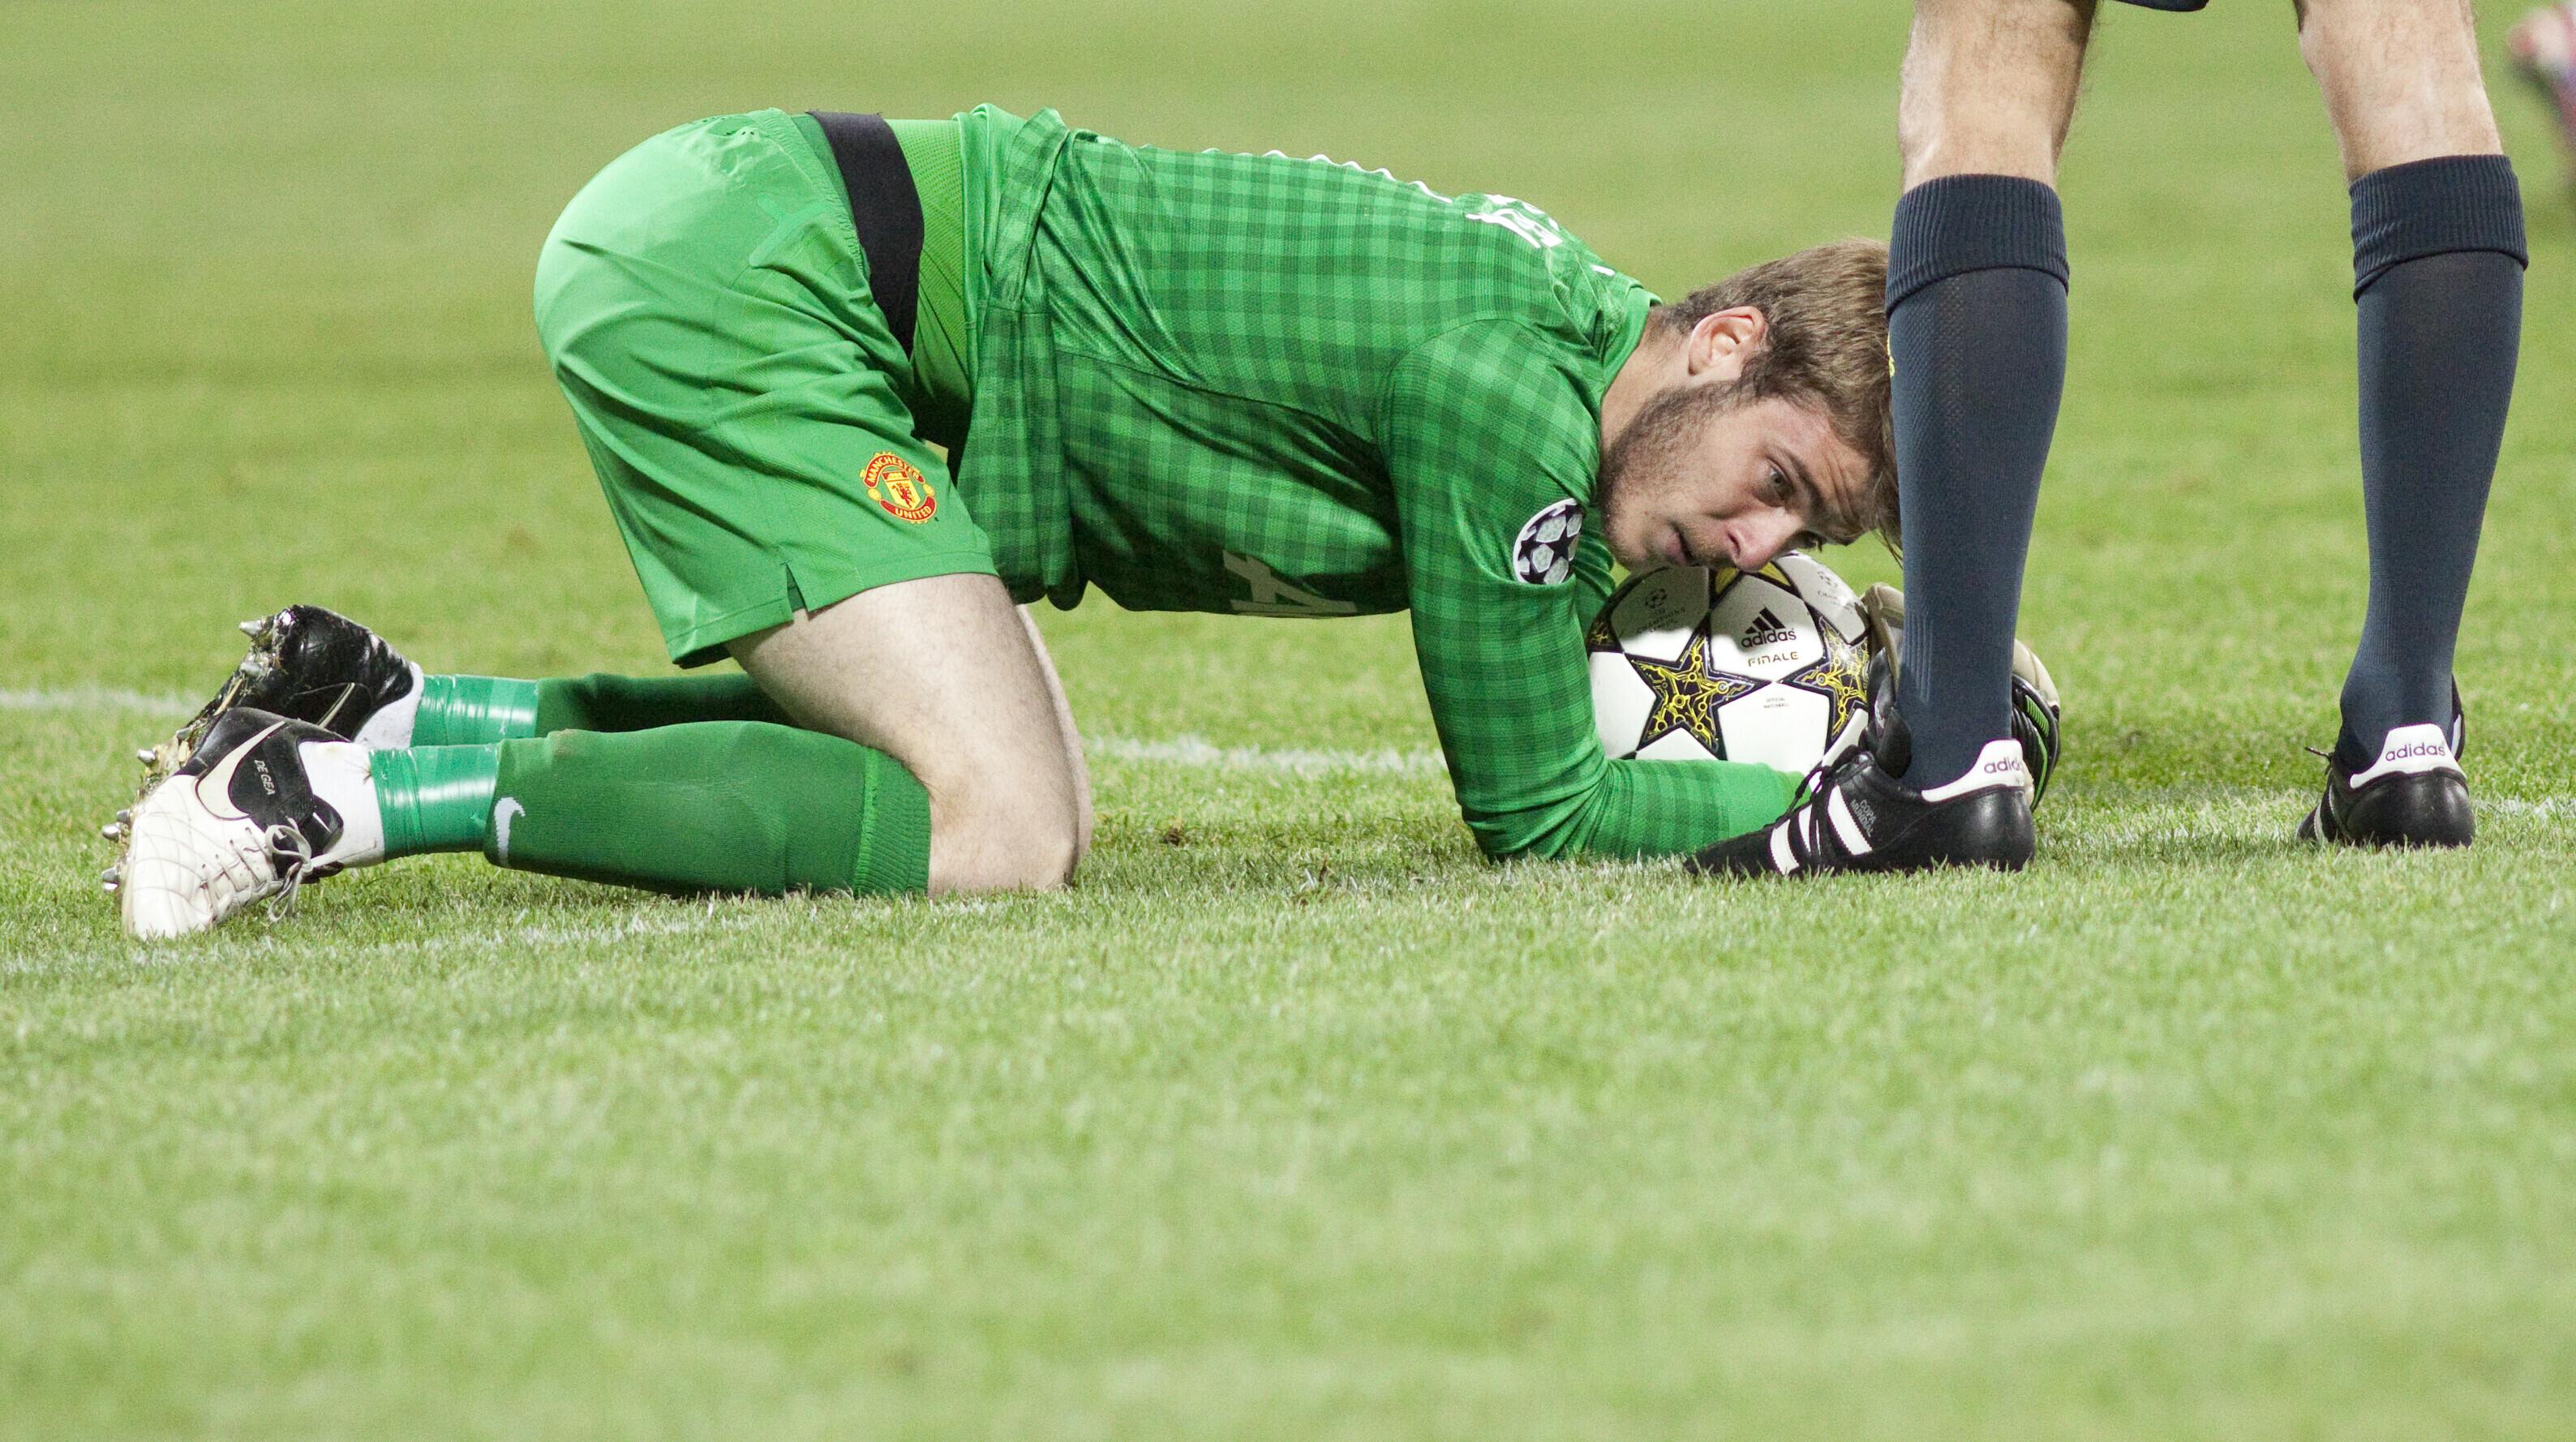 picture of manchester United goalkeeper Gavid De Gea on is hands and knees holding the ball